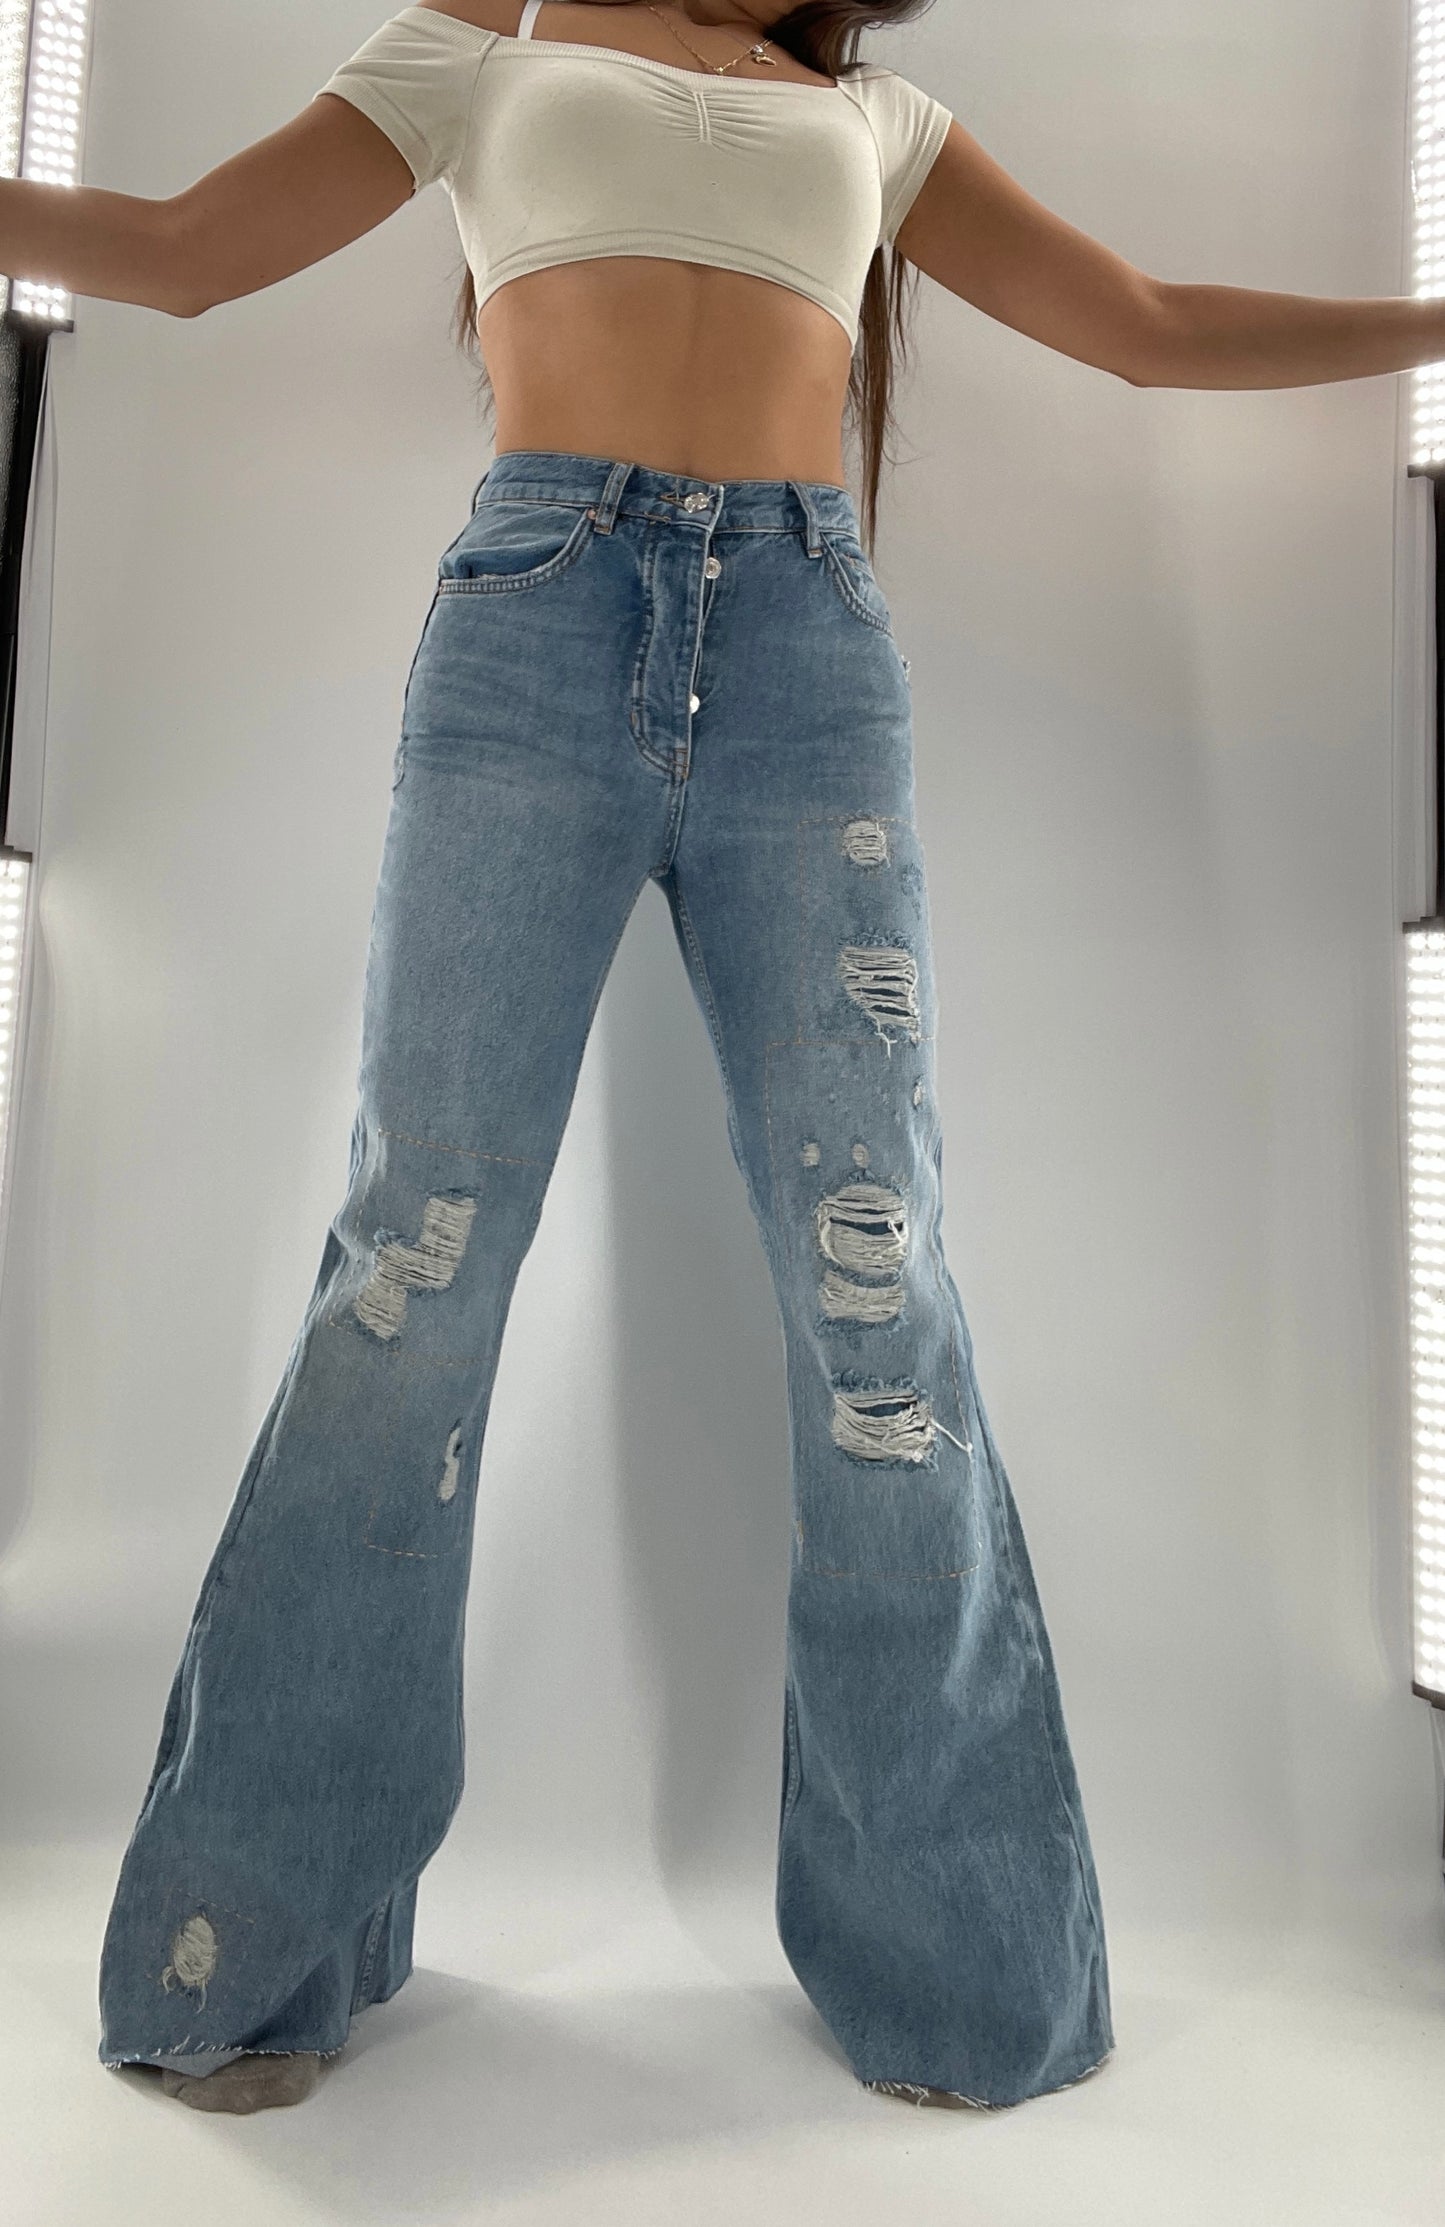 Free People Light Wash Jeans with Embroidery, Stitching, and Distressing (26)